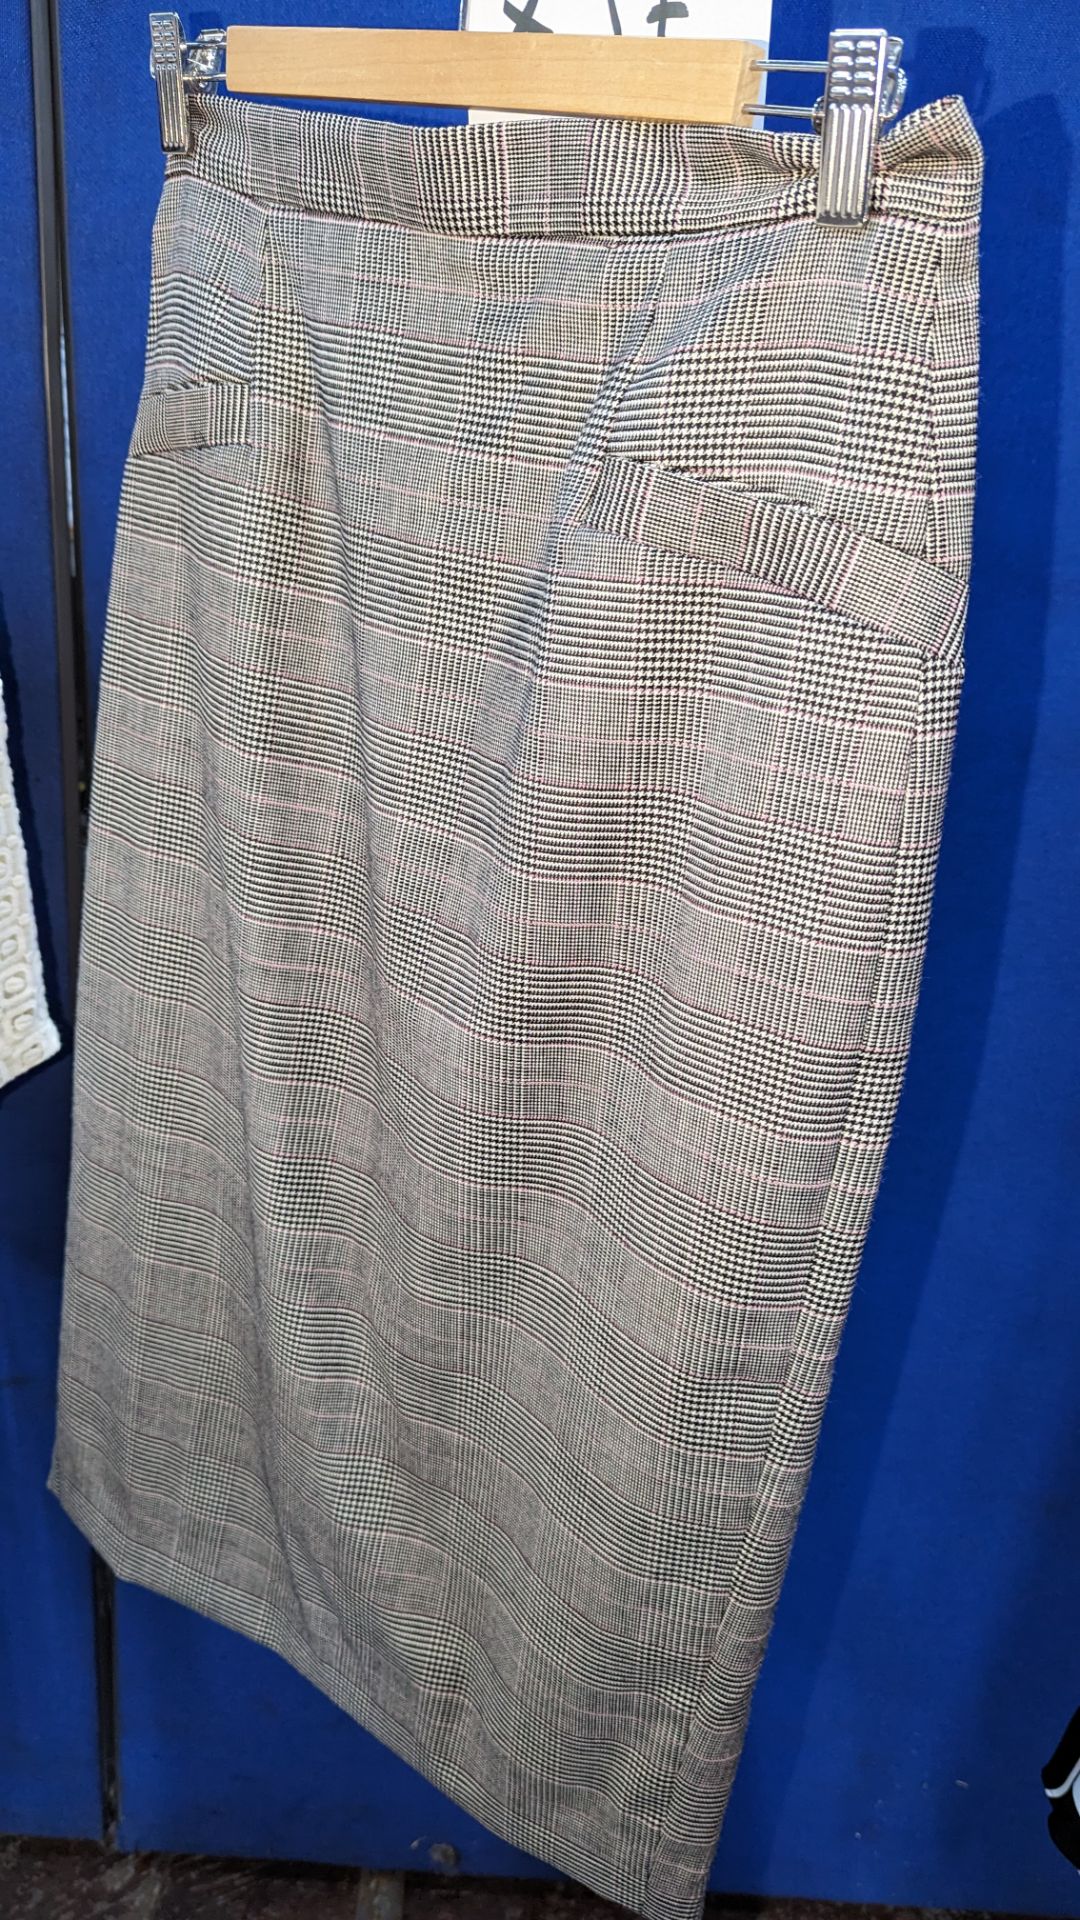 17 assorted skirts by Needle & Thread, Coast, L K Bennett, Frankie Morello, Reiss & others. NB the - Image 30 of 37